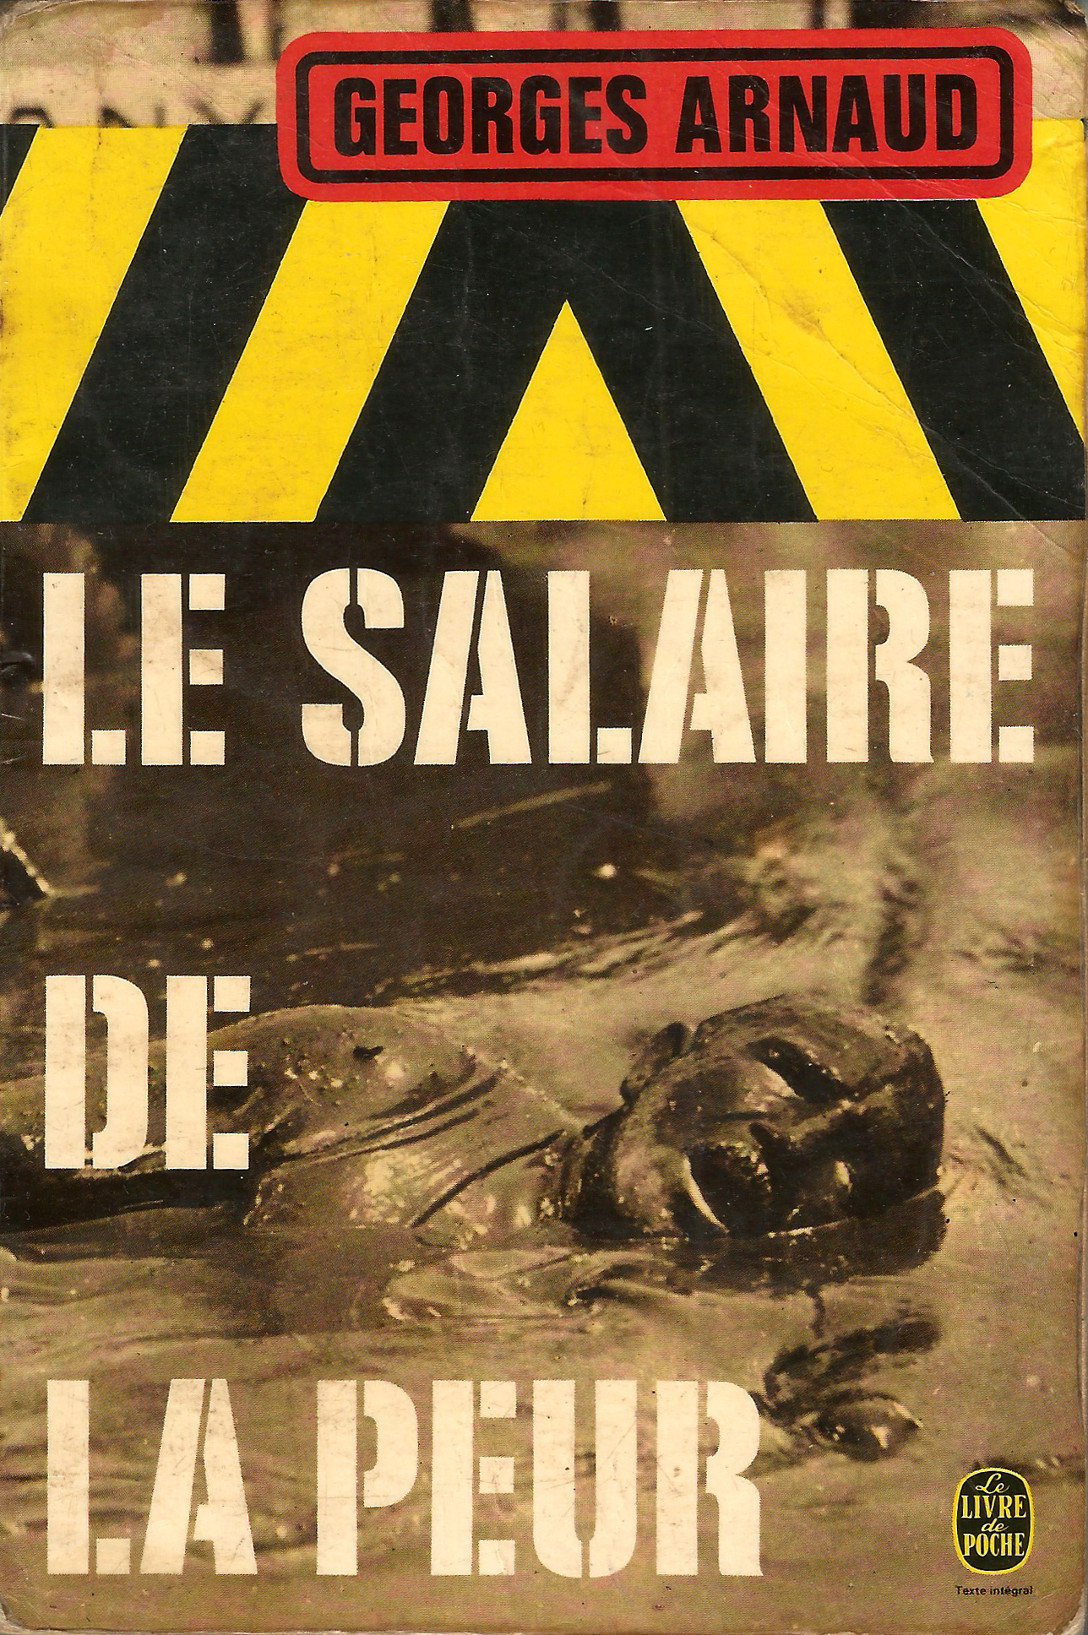 Le Salaire De Peur (The Wages of Fear), by Georges Arnaud (Julliard, 1950). From